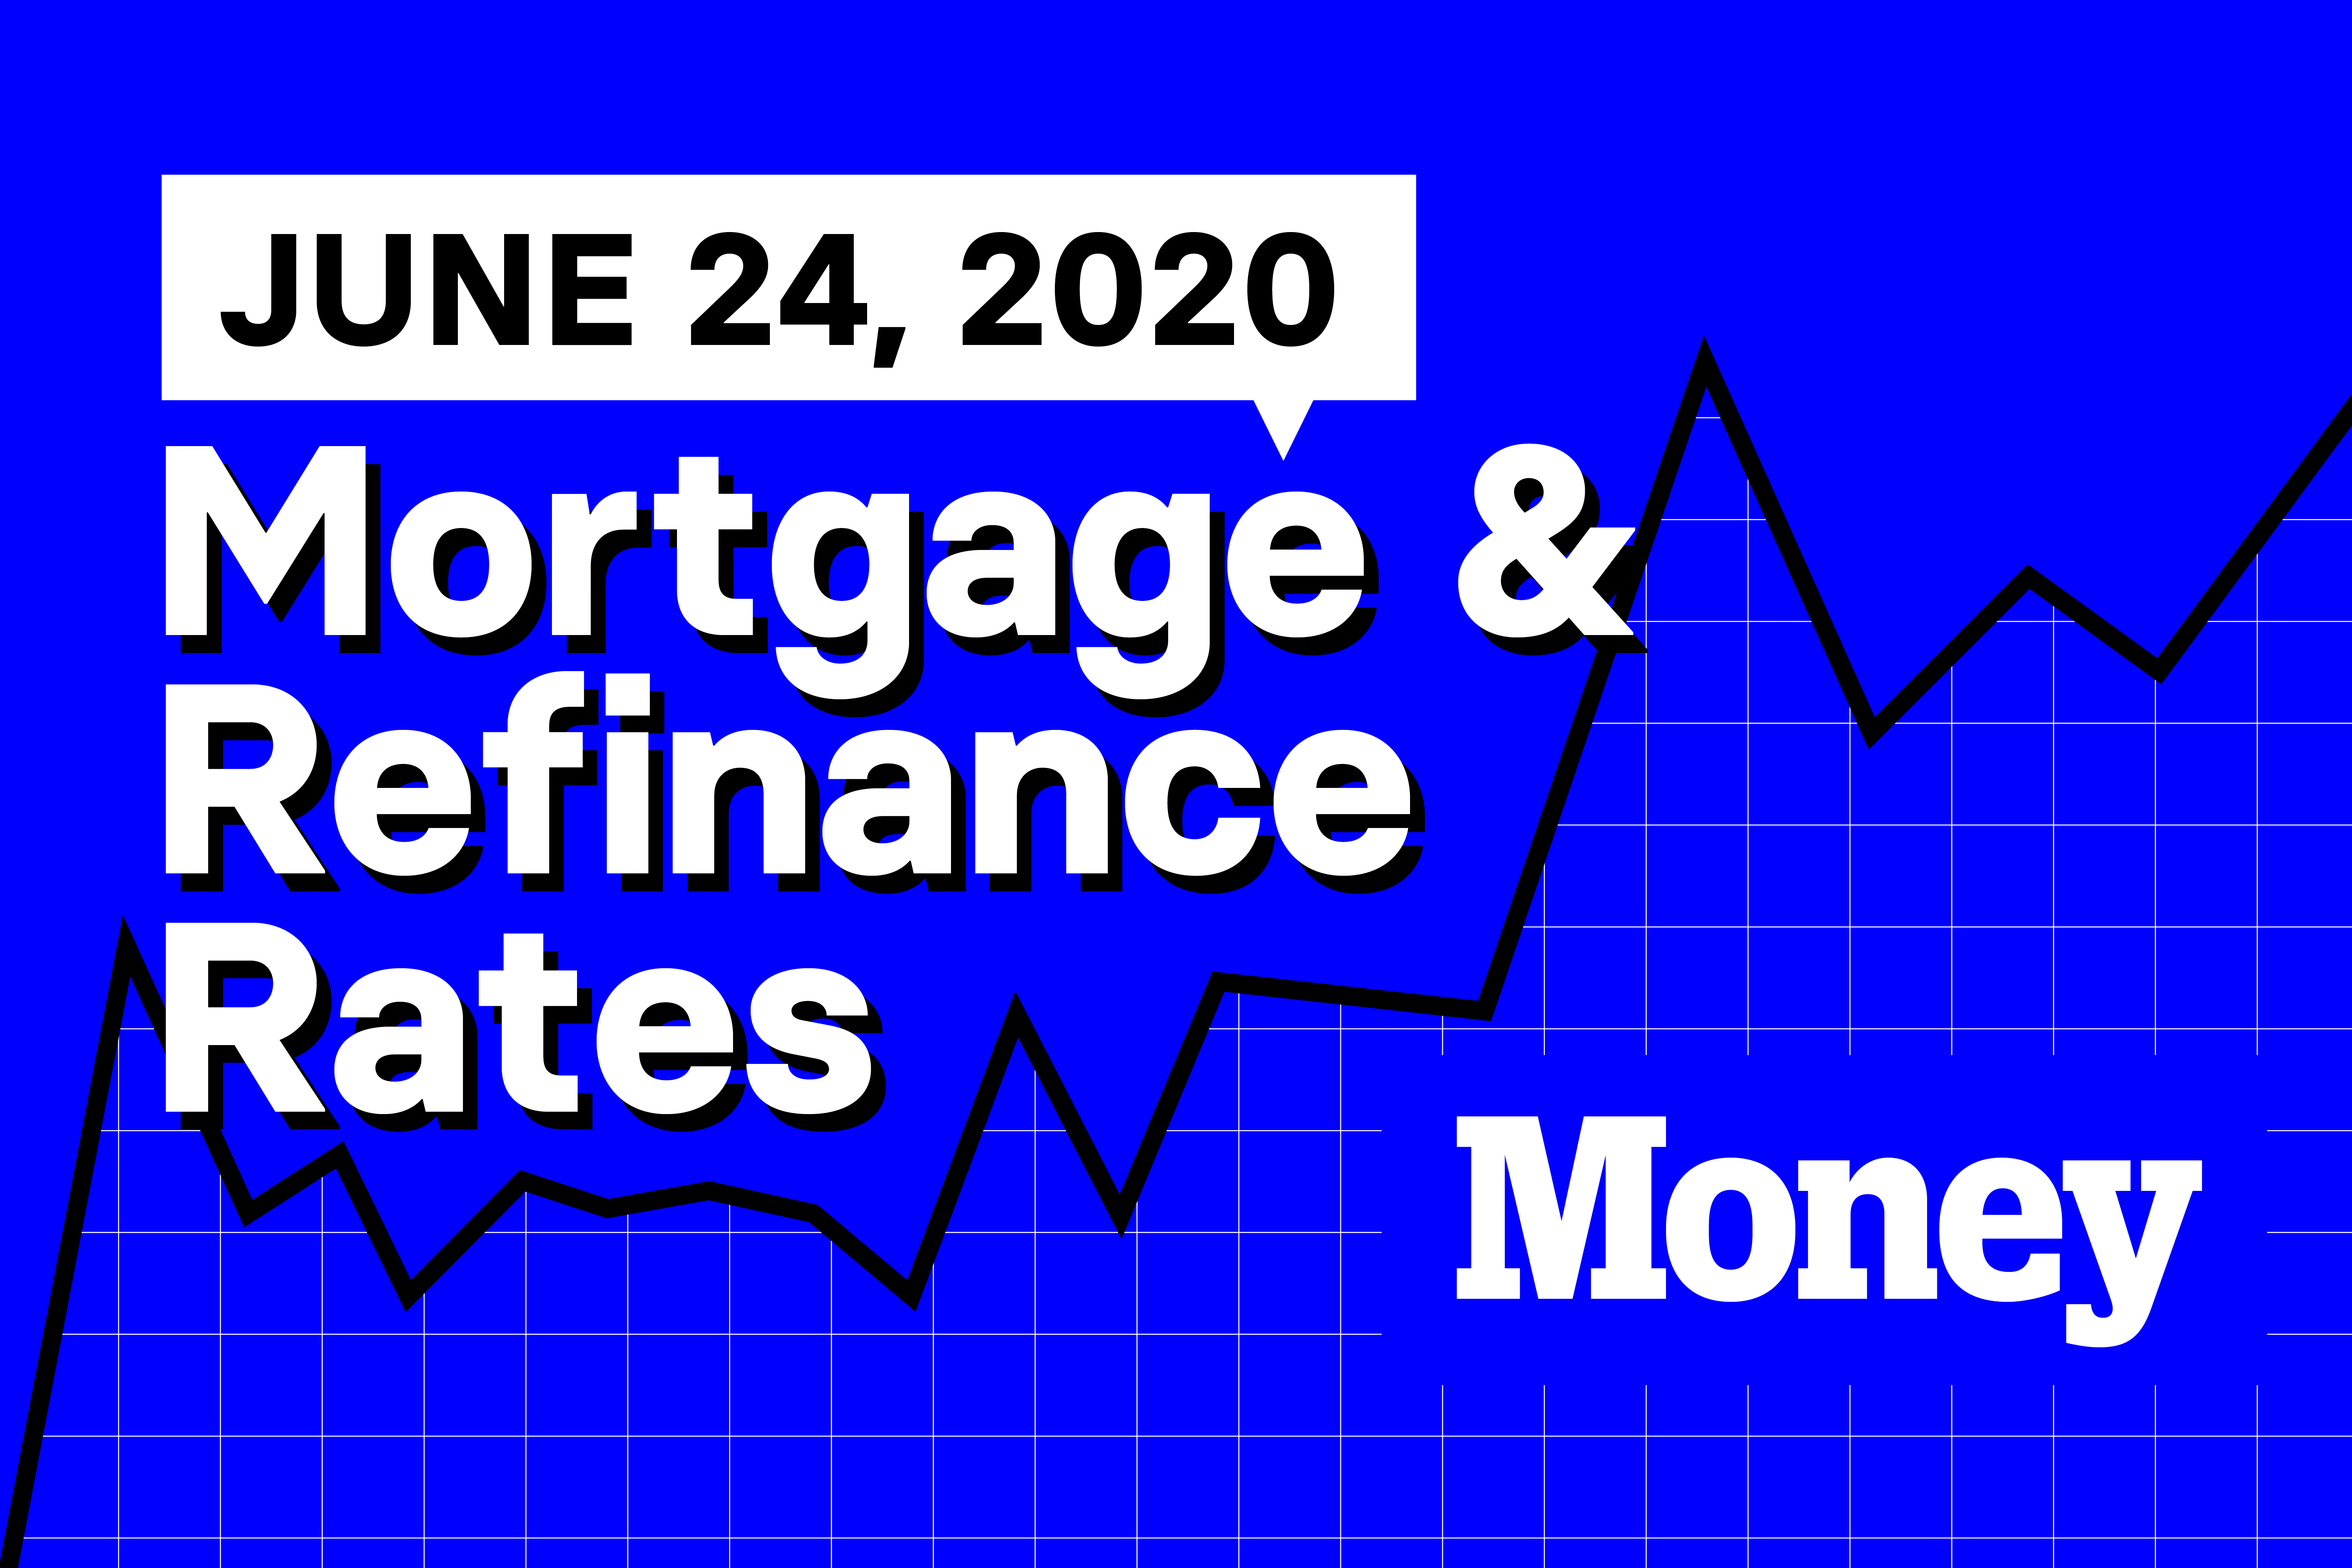 Here Are Today's Best Mortgage &amp; Refinance Rates for June 24, 2020